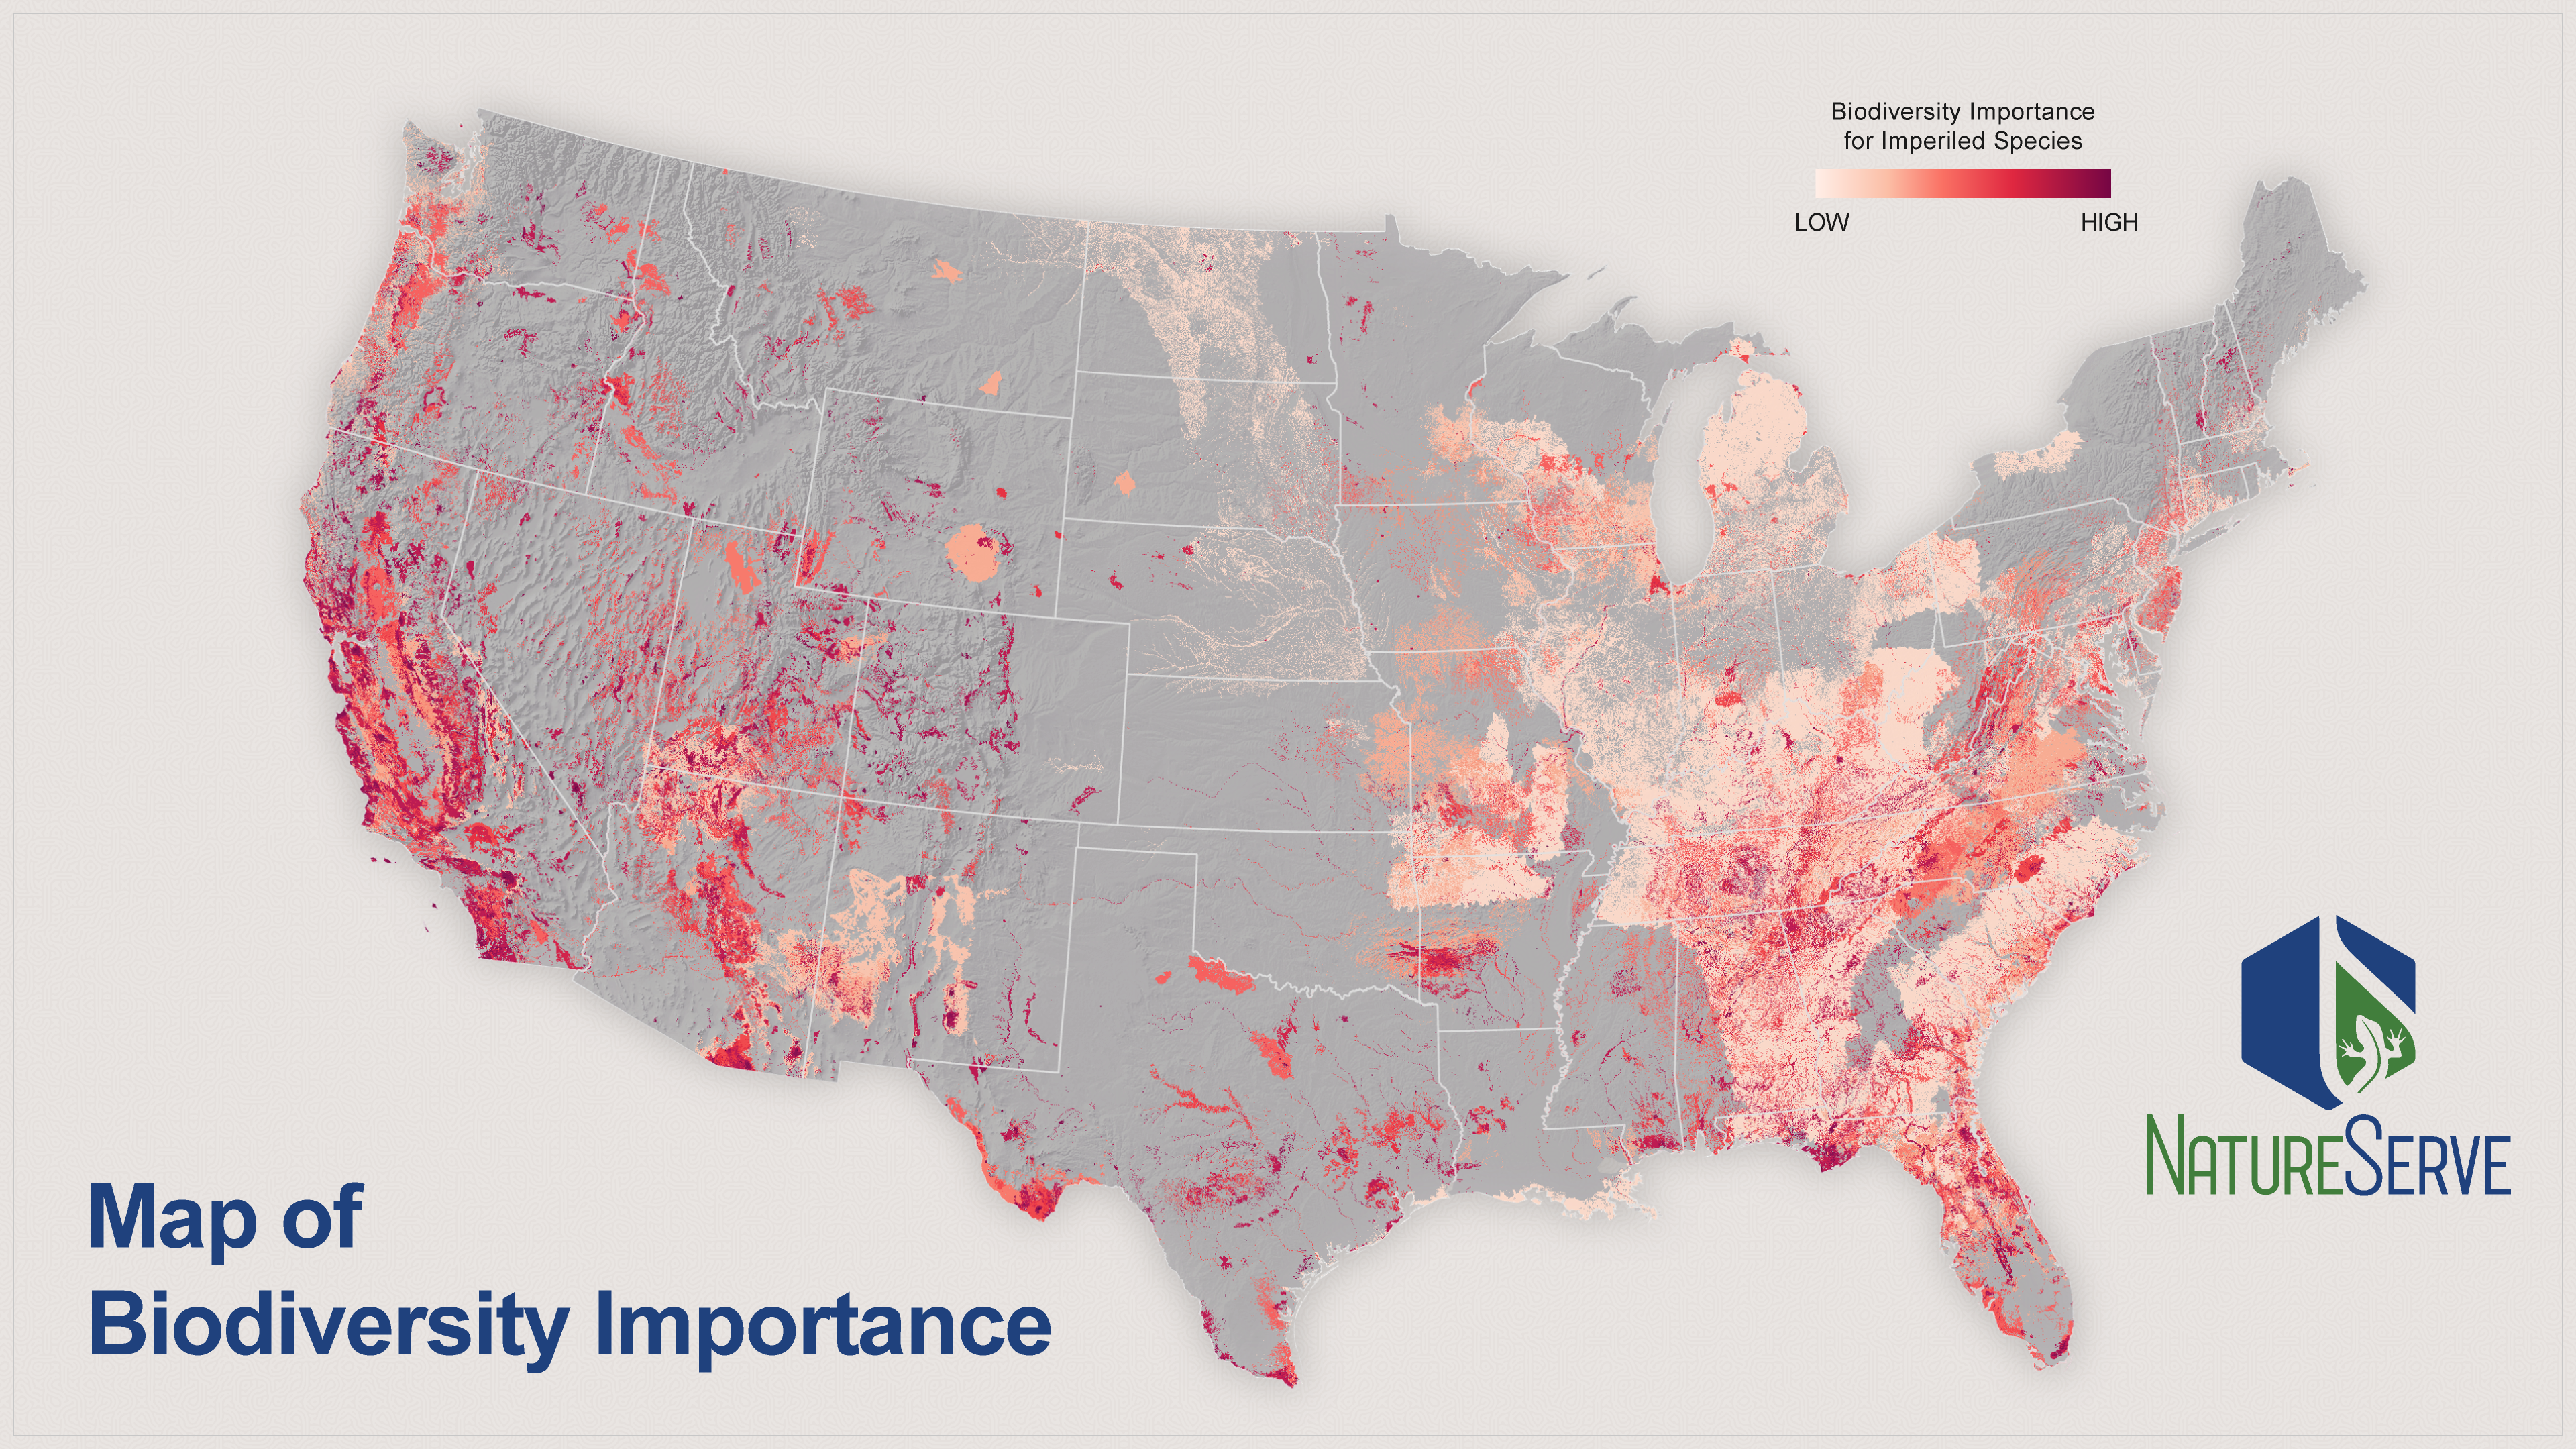 The map of biodiversity importance identifies areas of conservation value in the United States.